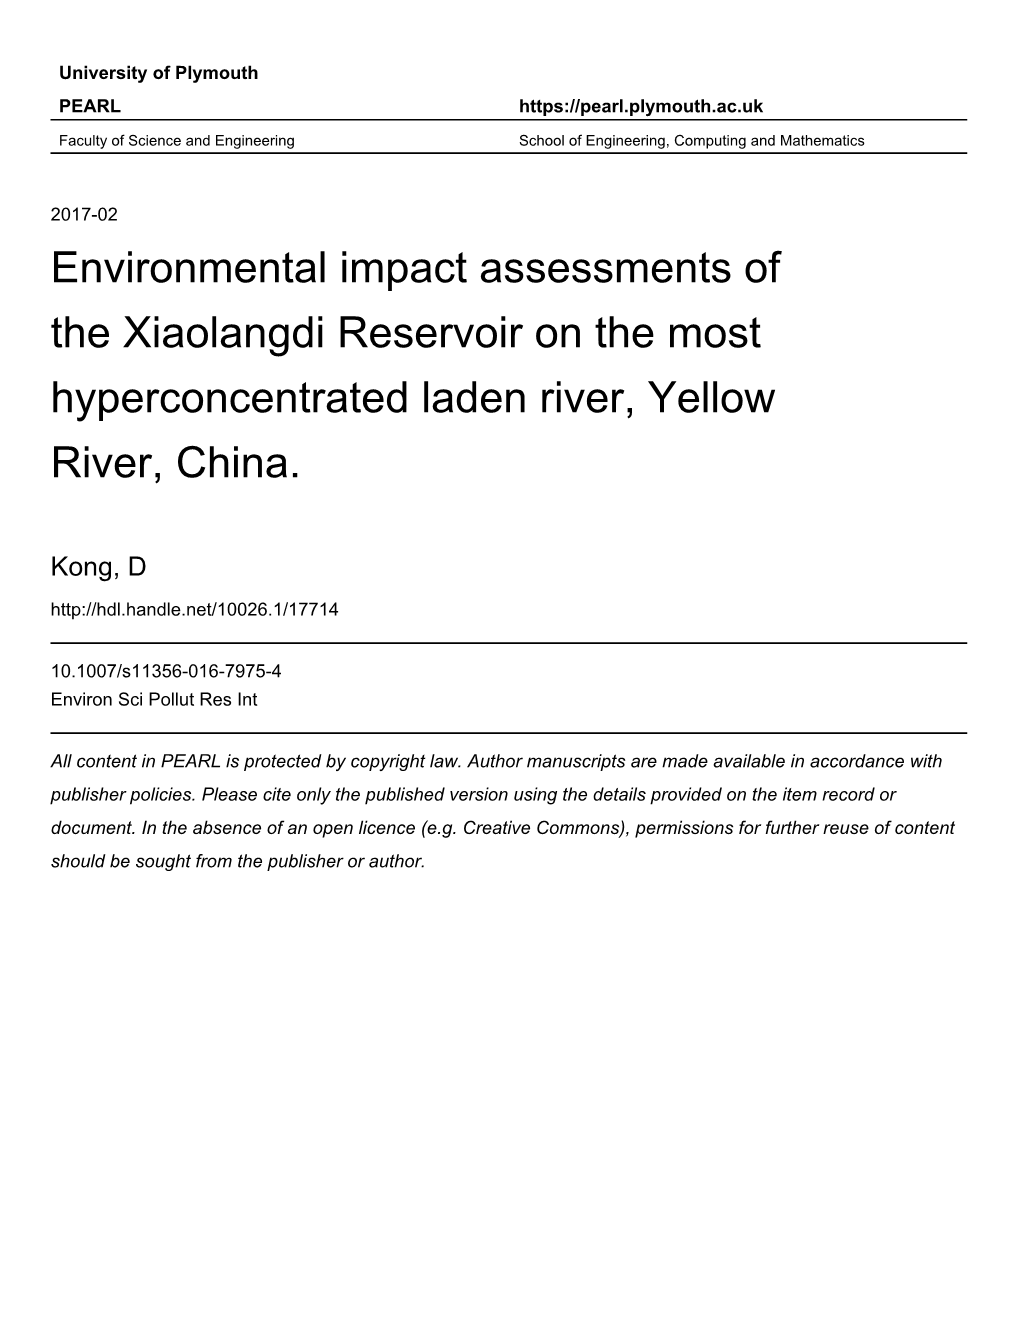 Environmental Impact Assessments of the Xiaolangdi Reservoir on the Most Hyperconcentrated Laden River, Yellow River, China